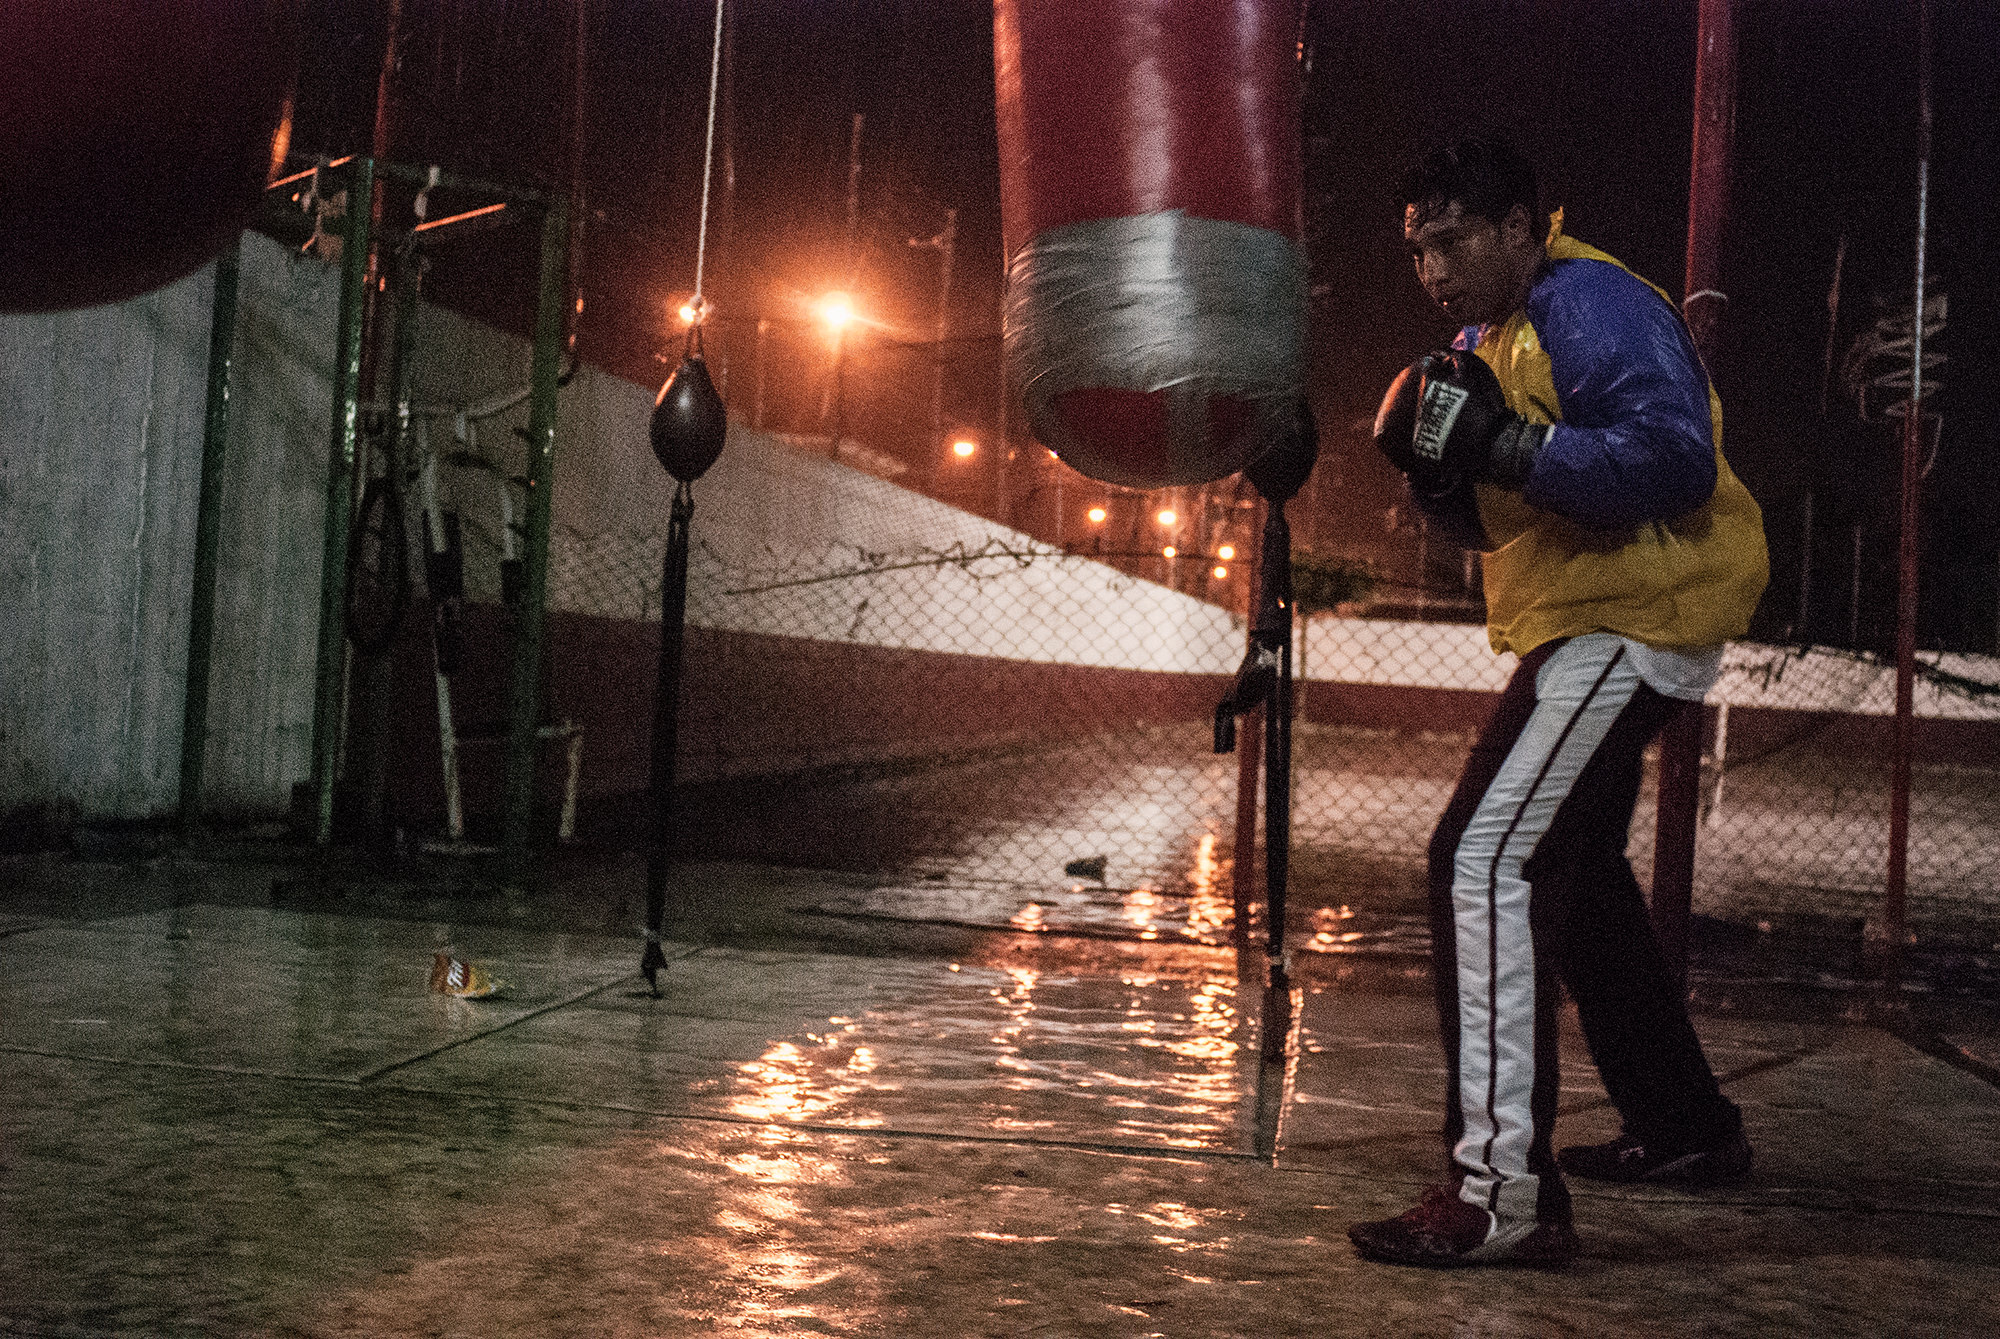  In the outdoor boxing gym of coach Lopez, a boxer works the punching bag on a rainy night. 